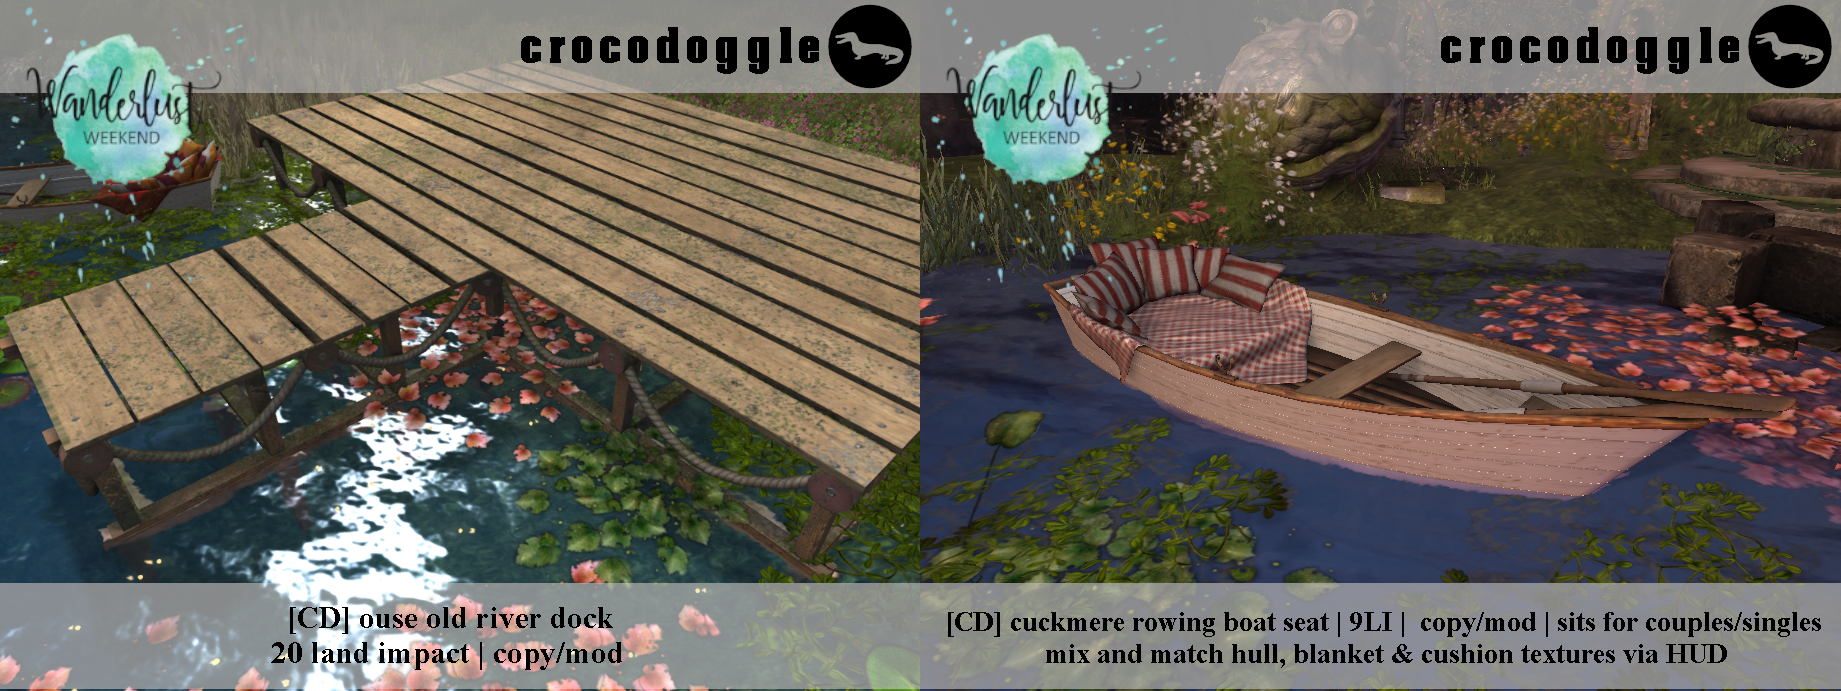 Crocodoggle – Ouse Old River Dock & Cuckmere Rowing Boat Seat